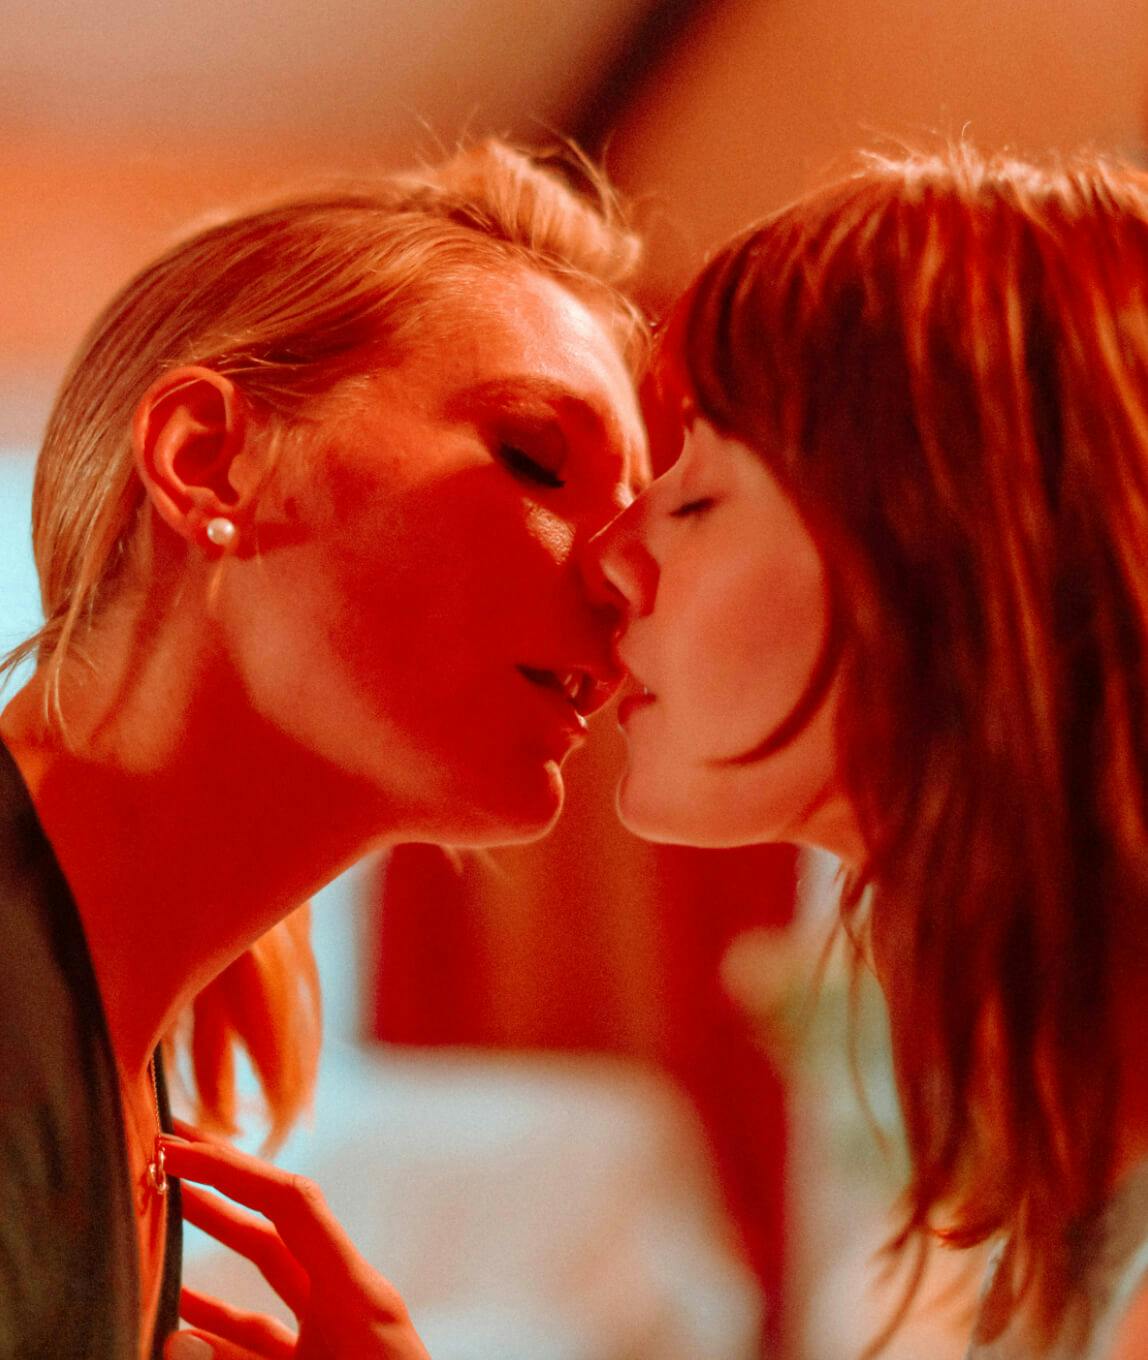 Lesbian Porn: 14 Best Lesbian Porn Sites for Videos and Movies